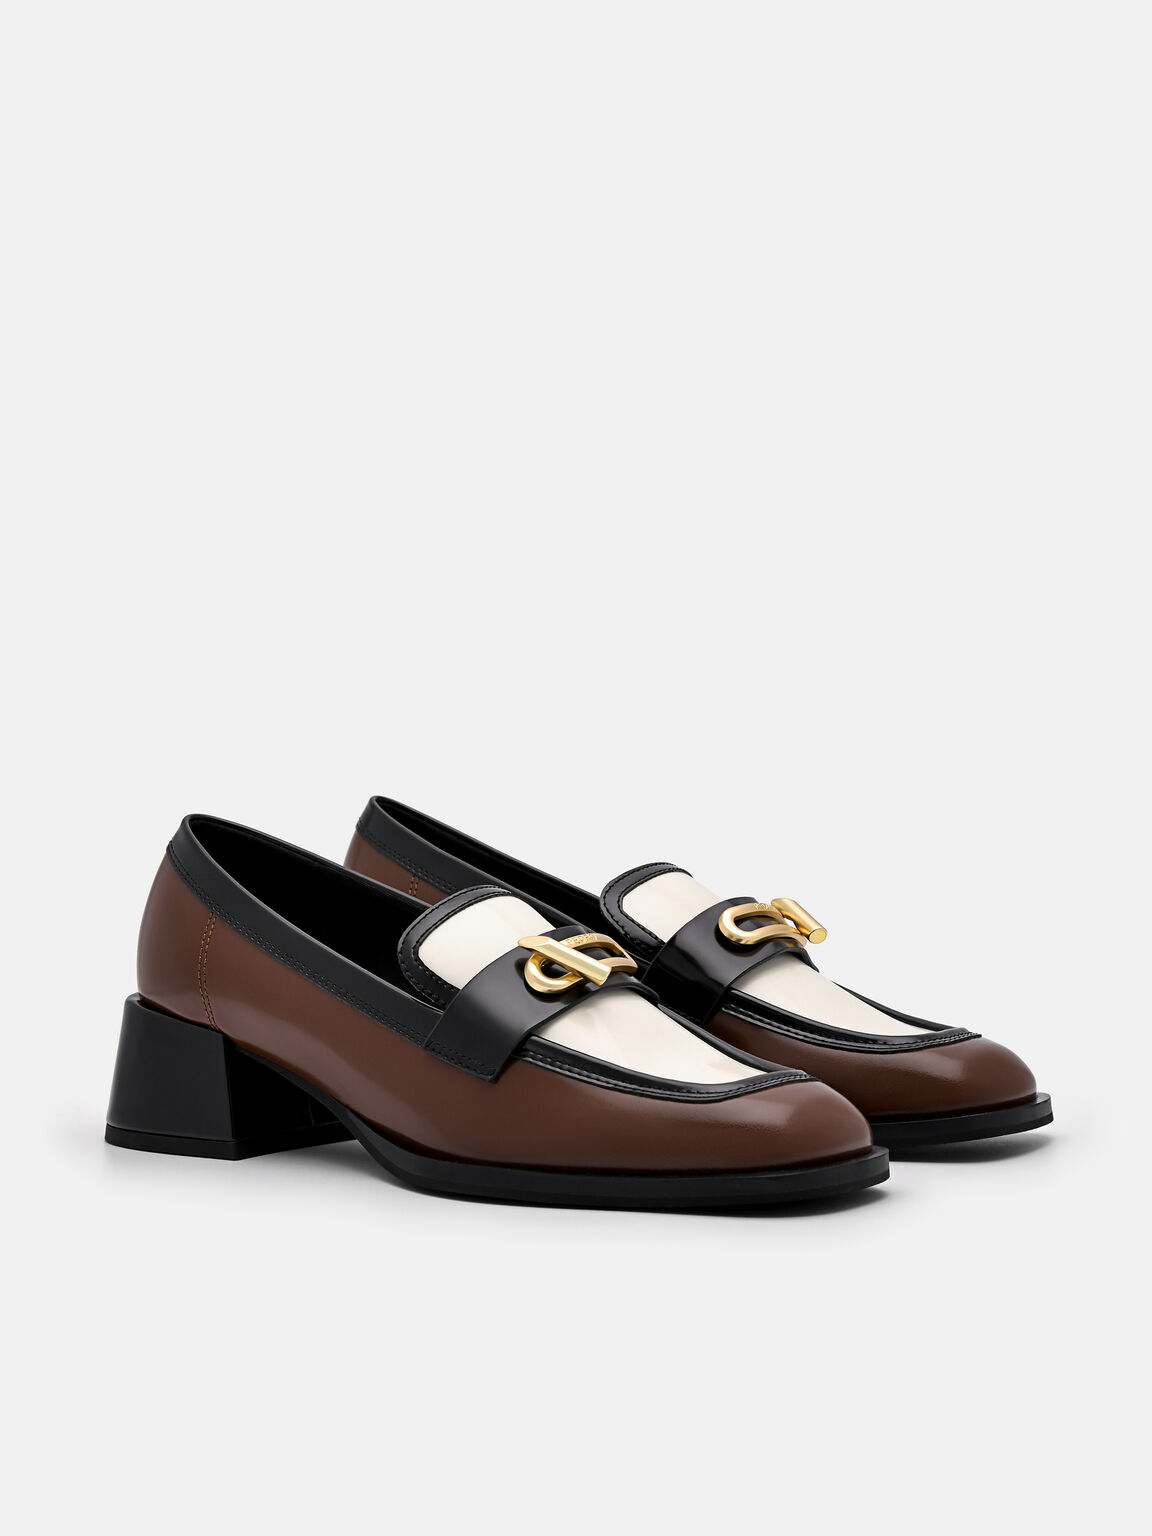 Brie Leather Heel Loafers, Multi